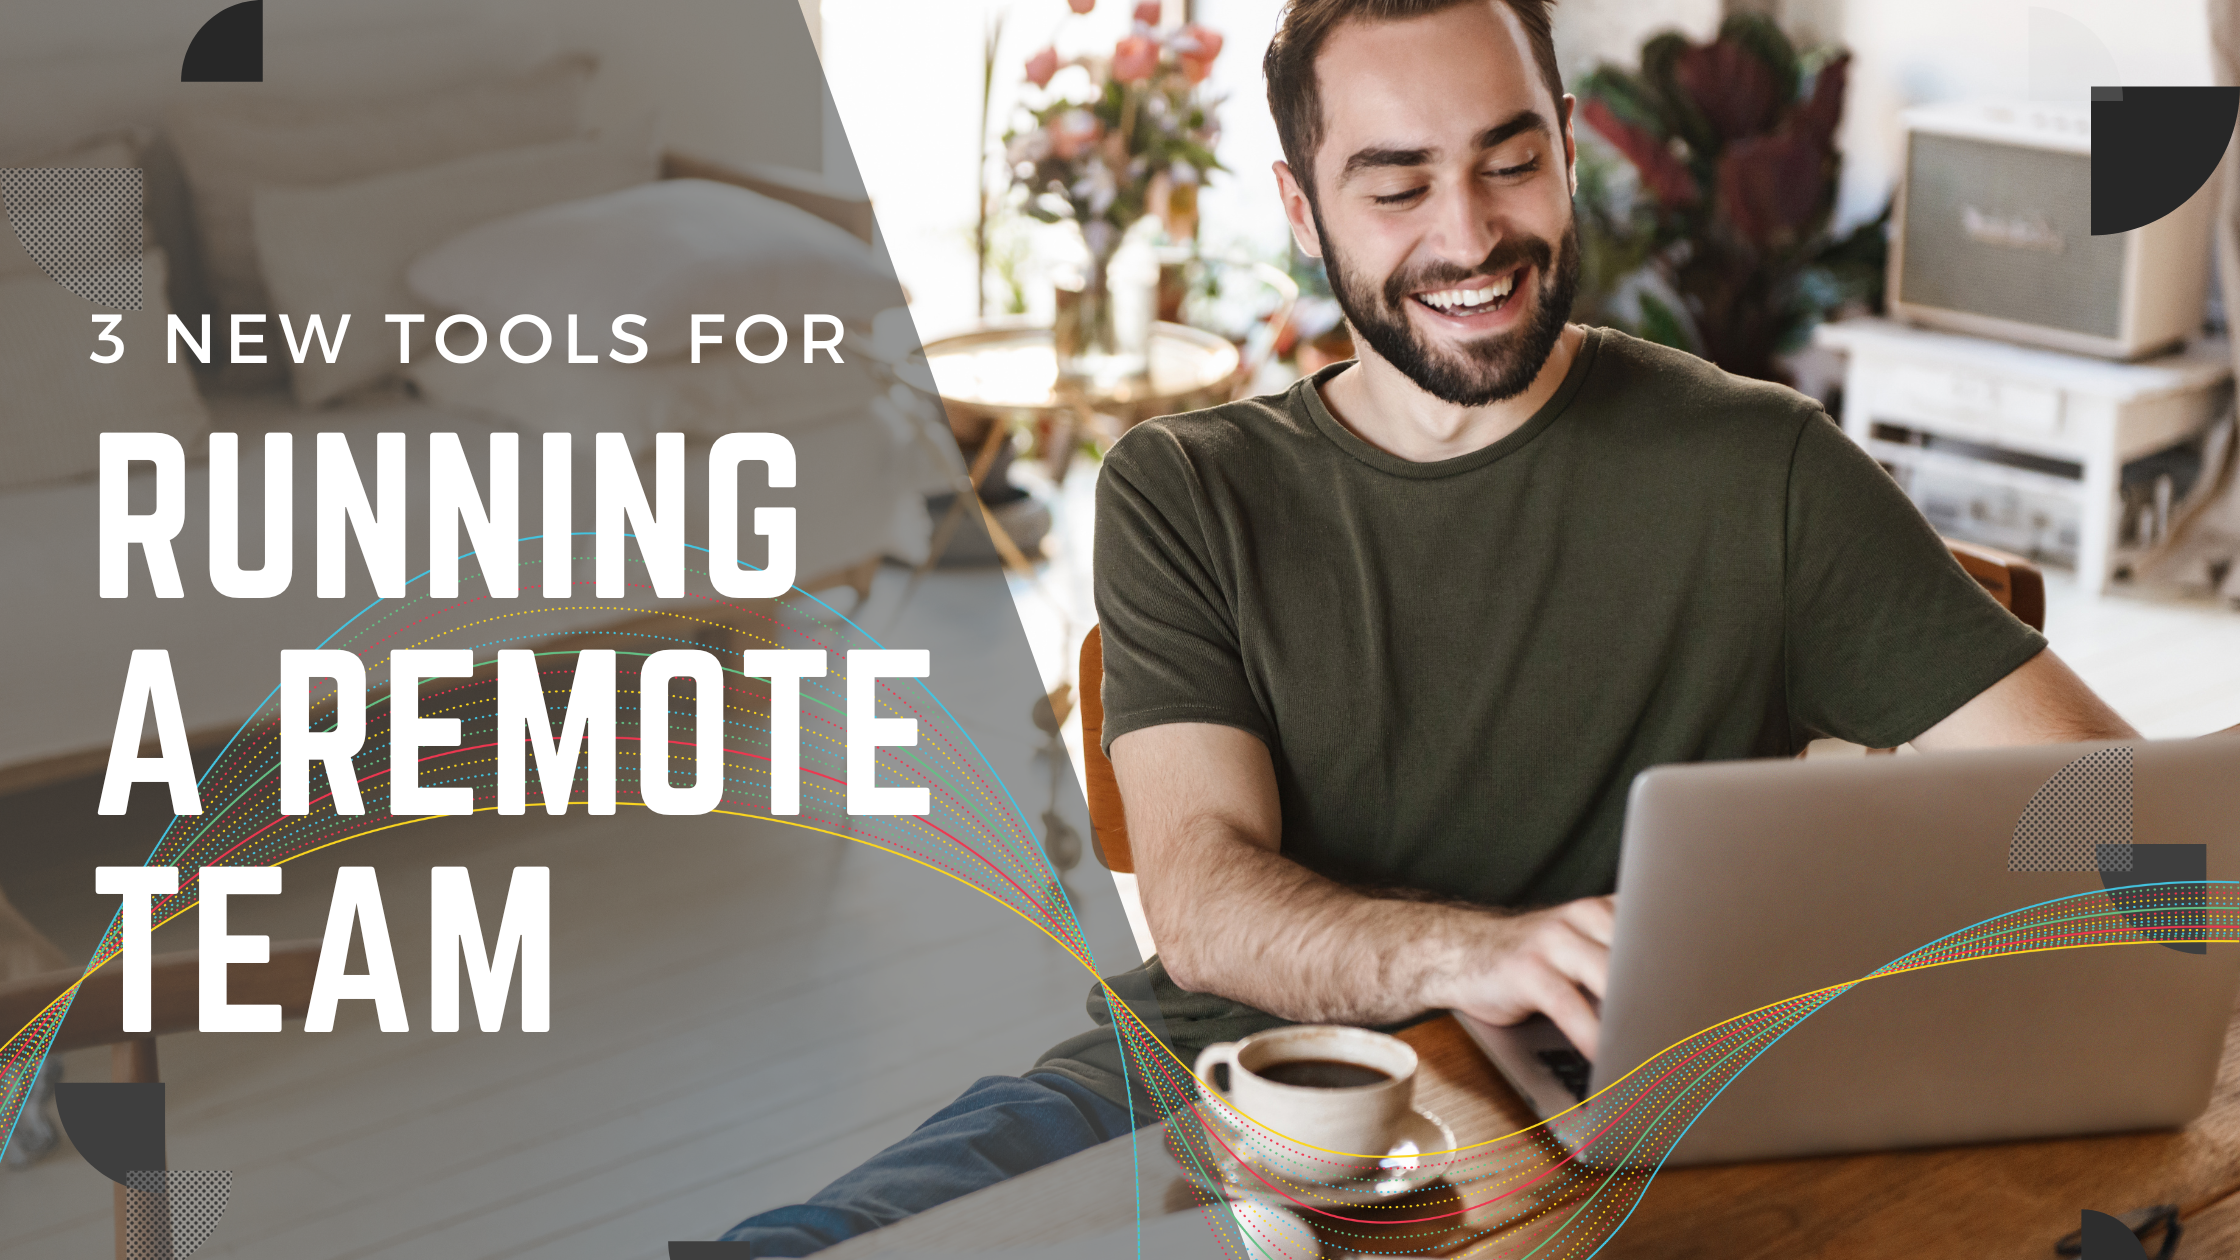 3 NEW TOOLS FOR RUNNING A REMOTE TEAM 